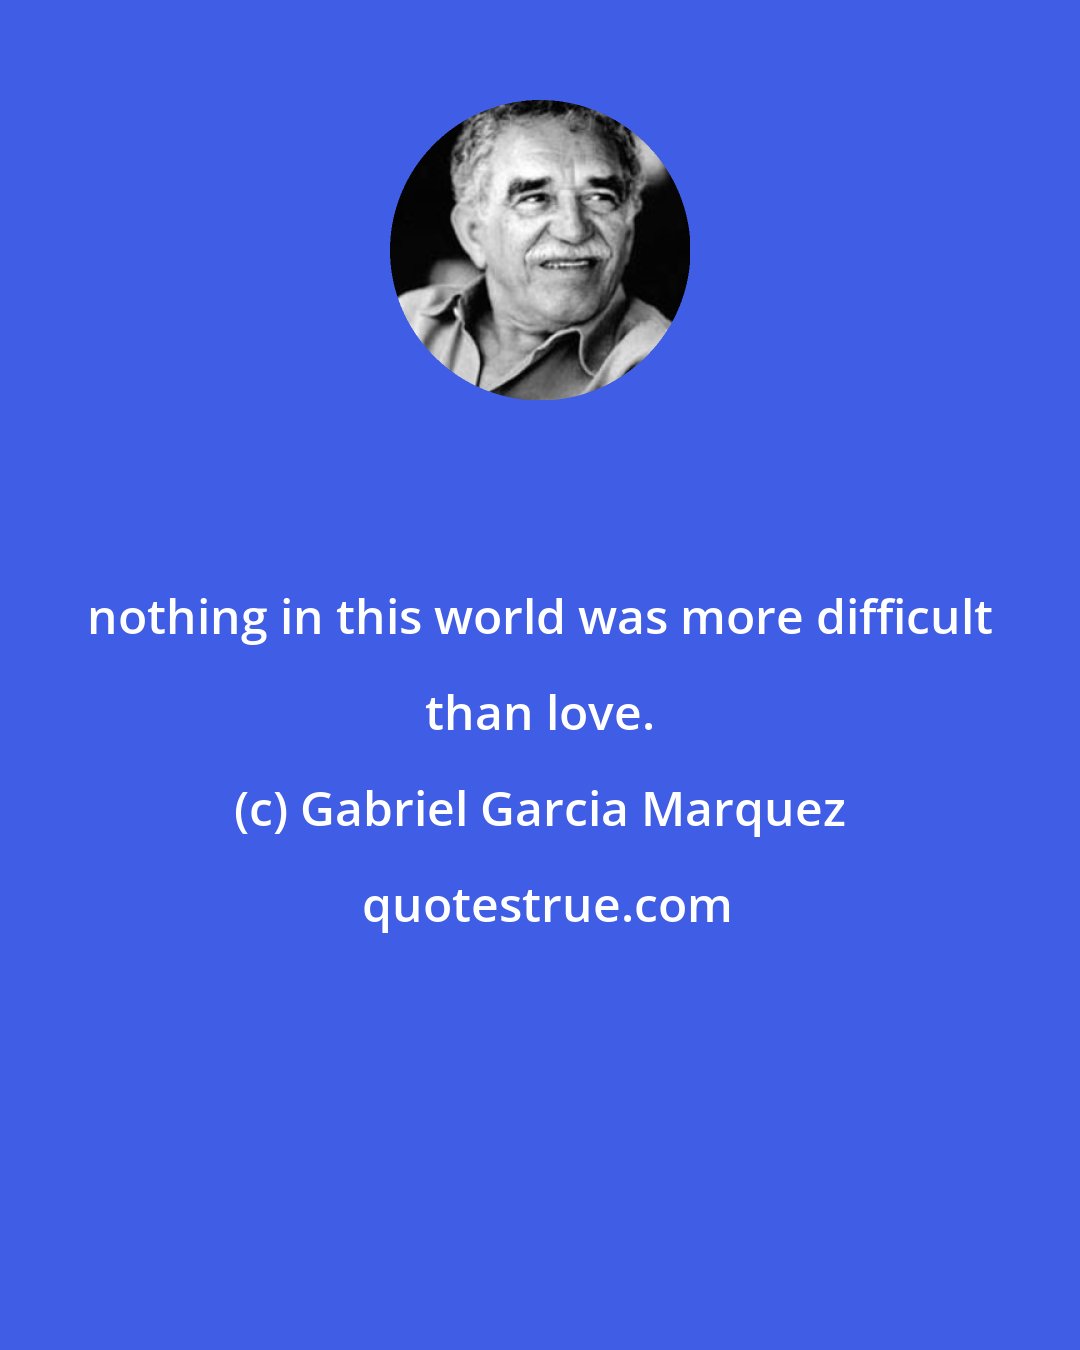 Gabriel Garcia Marquez: nothing in this world was more difficult than love.